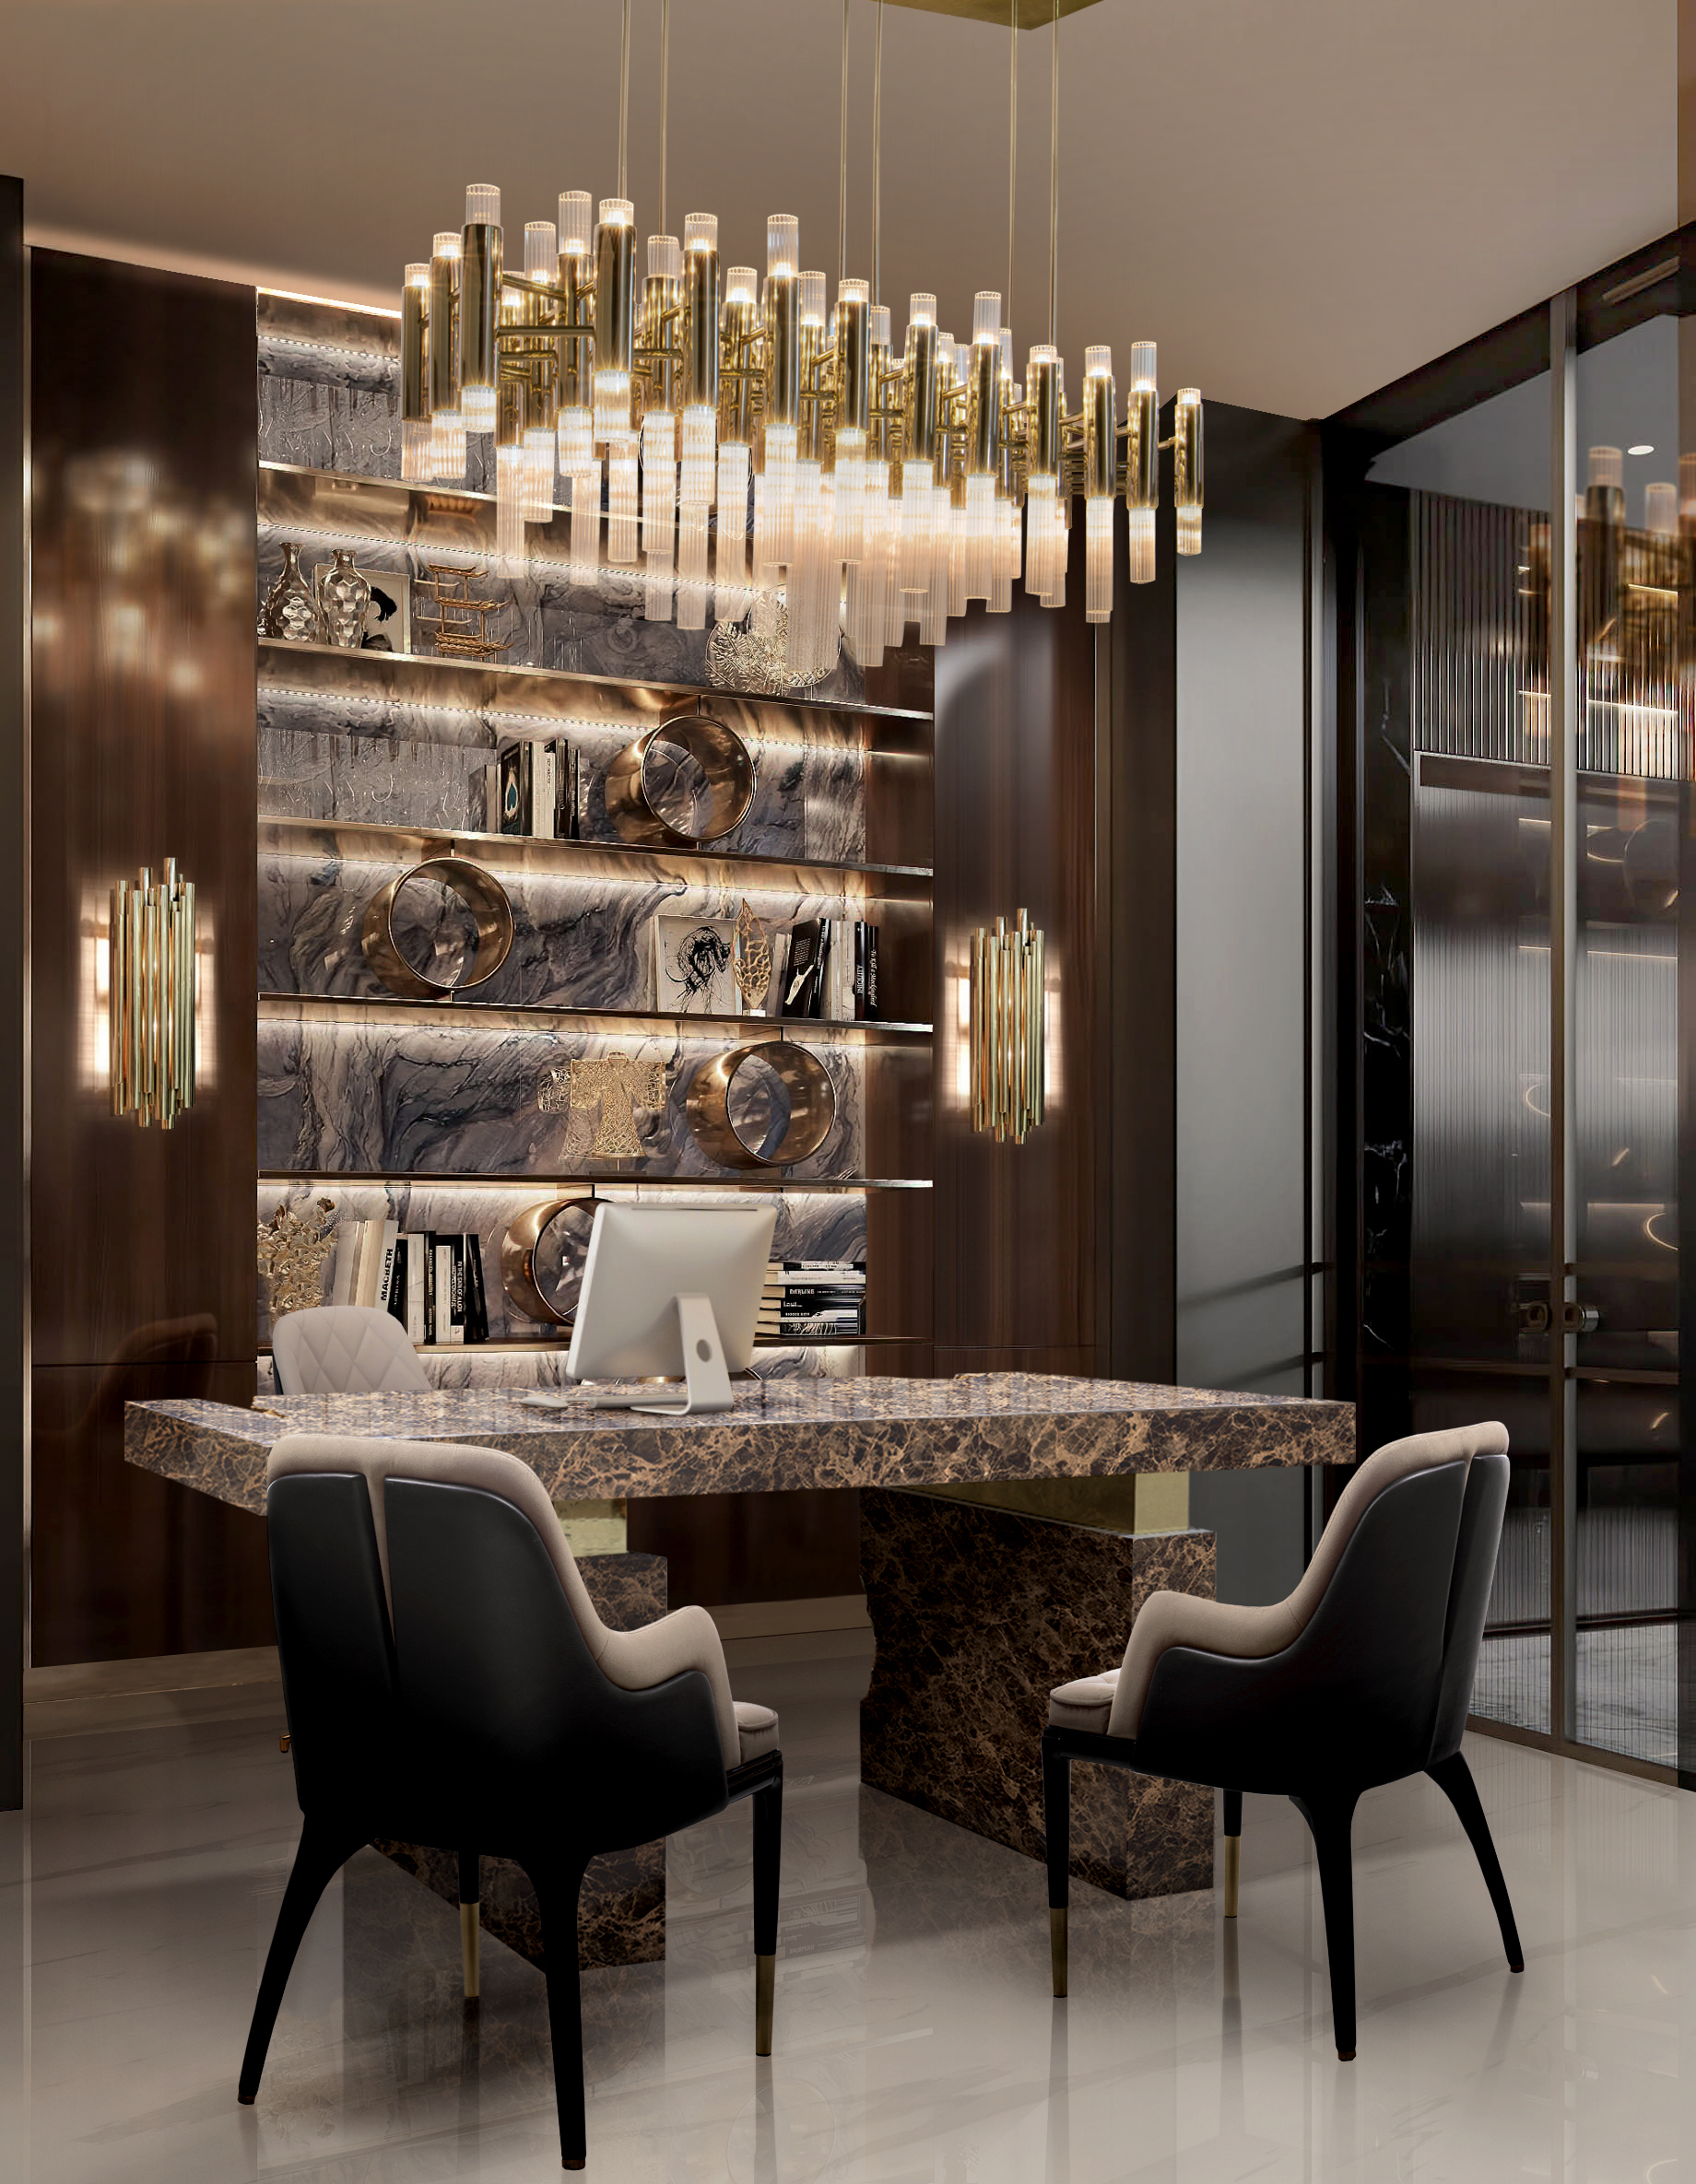 DESIGNING LUXURY OFFICES WITH A TIMELESS ELEGANCE: EMBRACING BROWN TONES